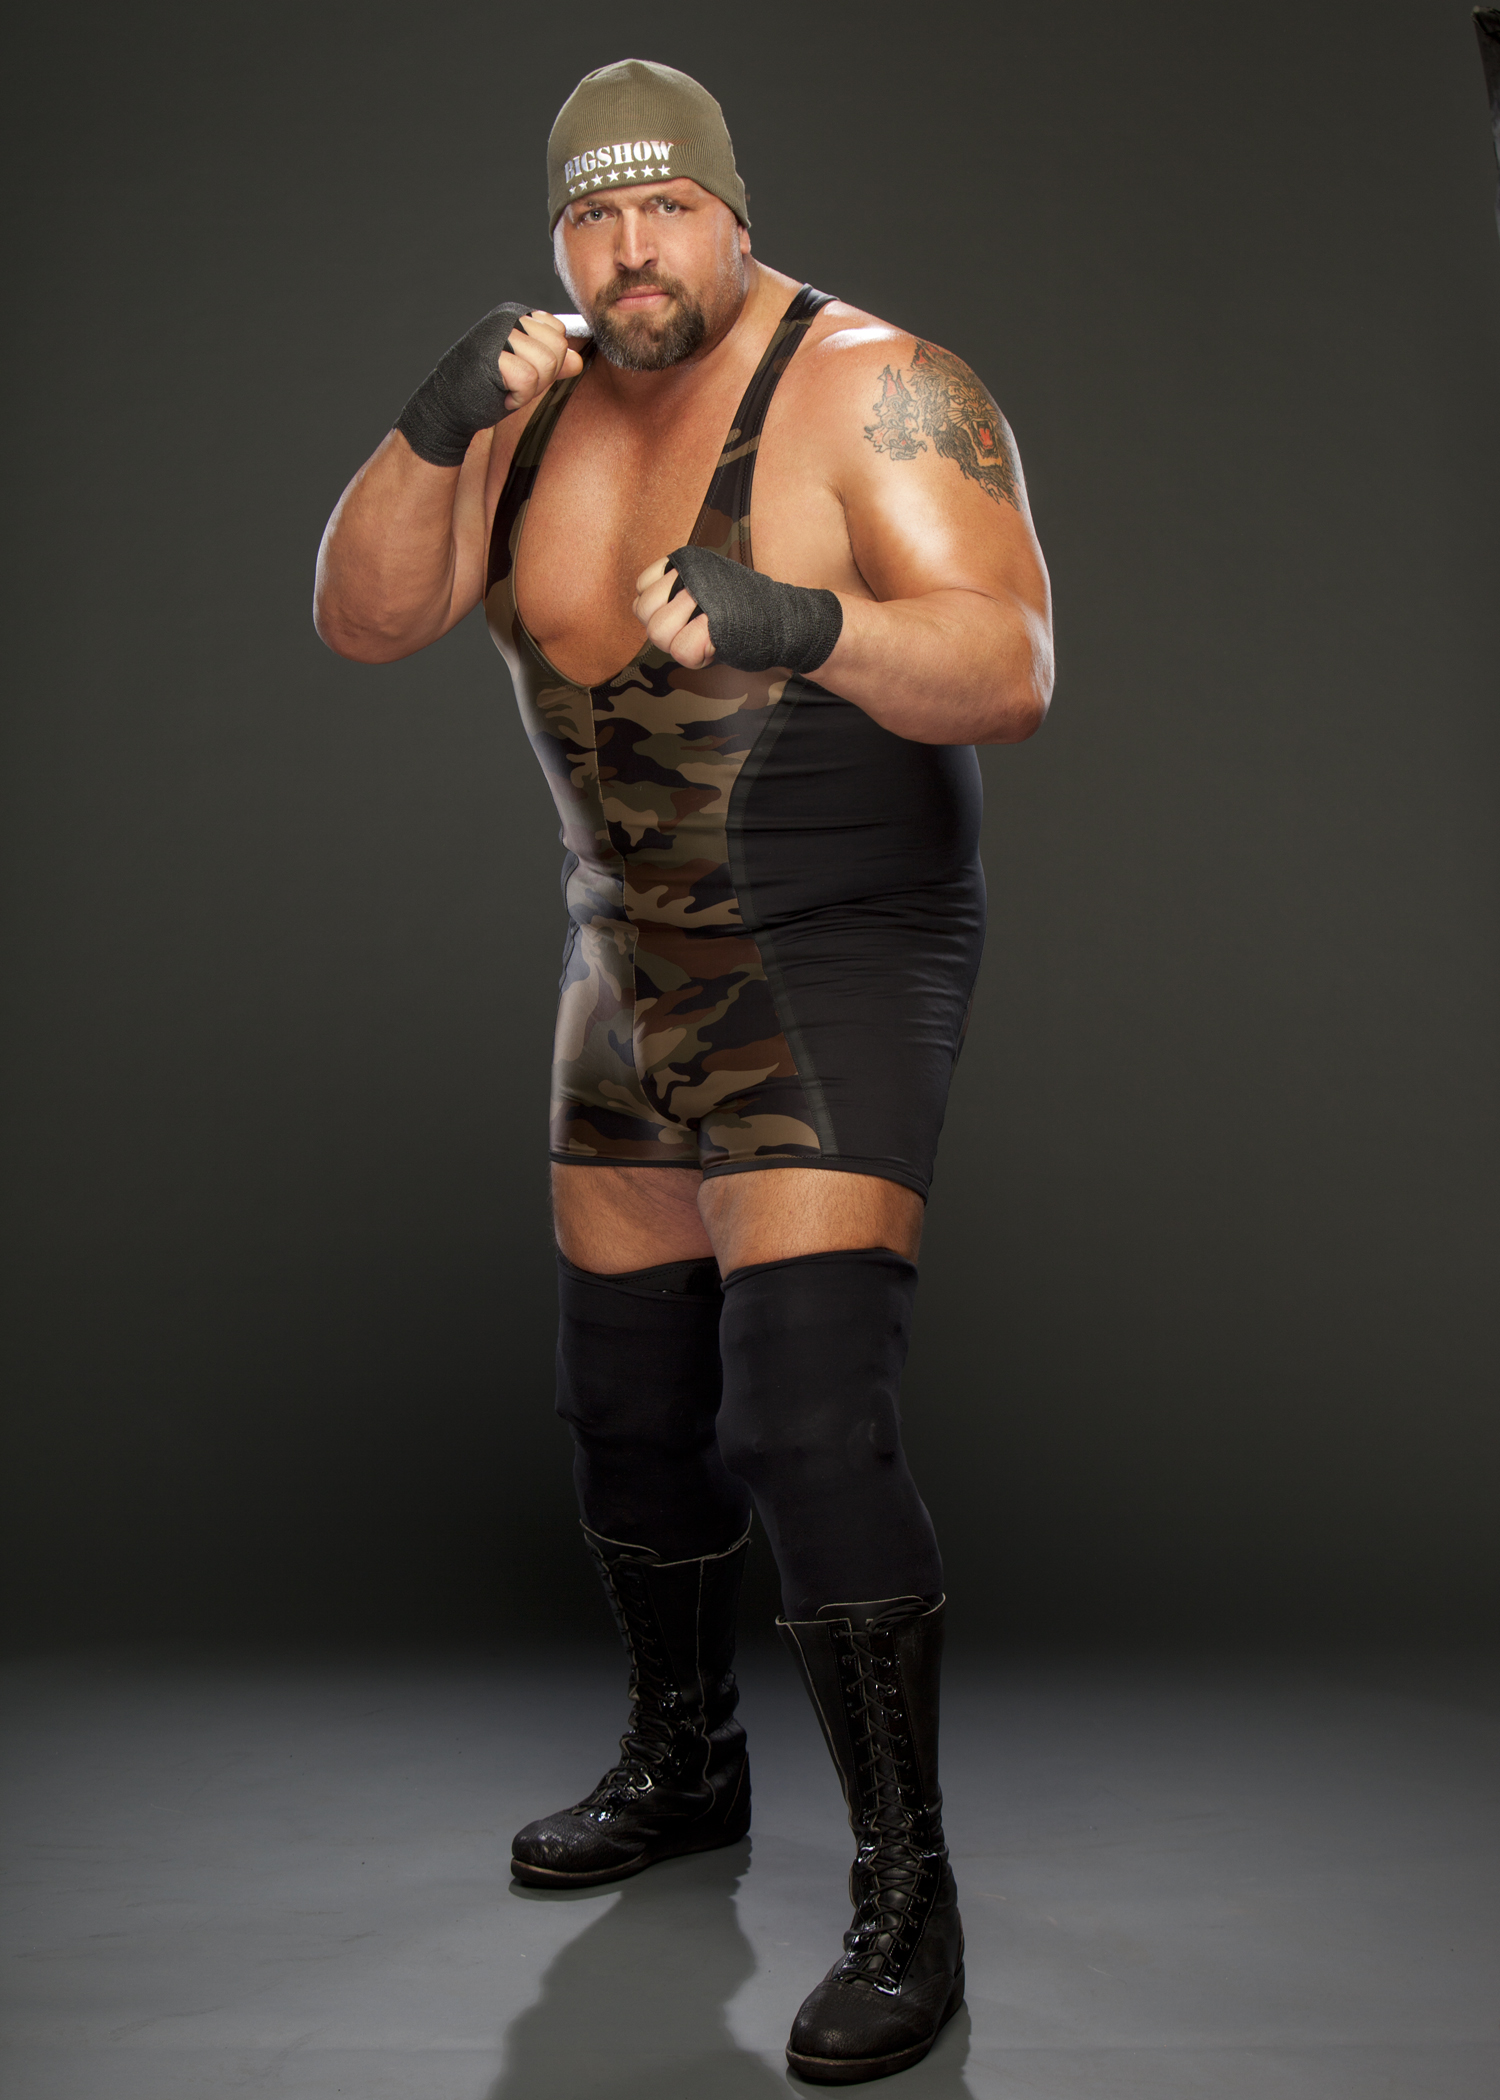 Wwe S Big Show Talks About His Current Career Goals Wrestling With Pop Culture